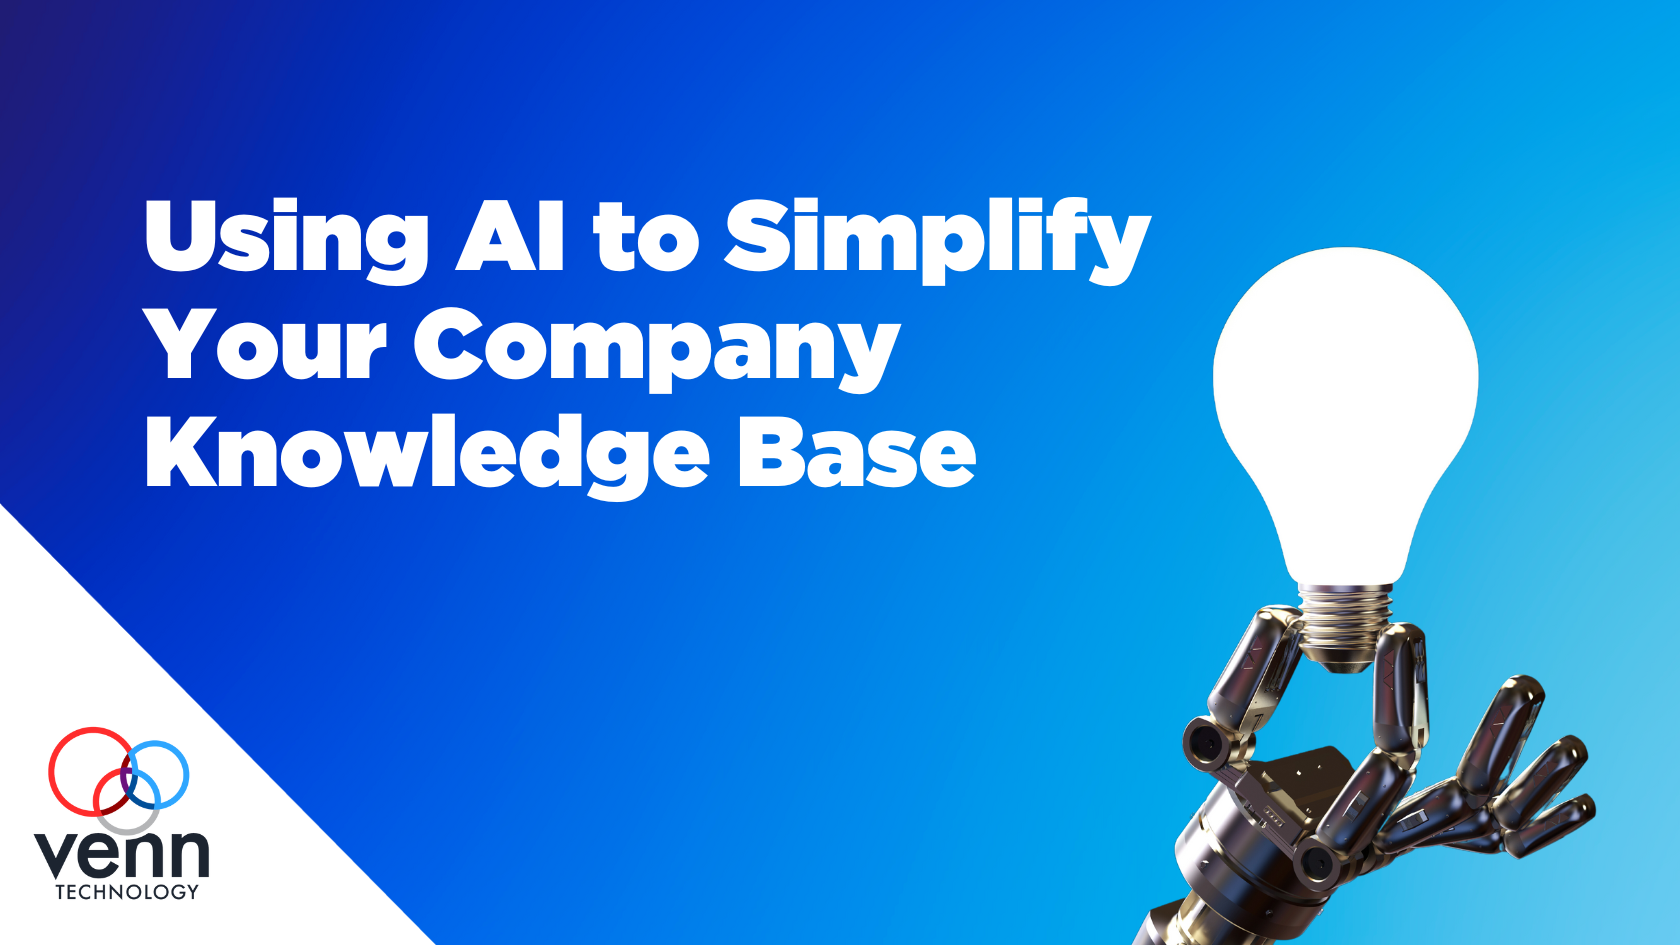 Using AI to Simplify Your Company Knowledge Base